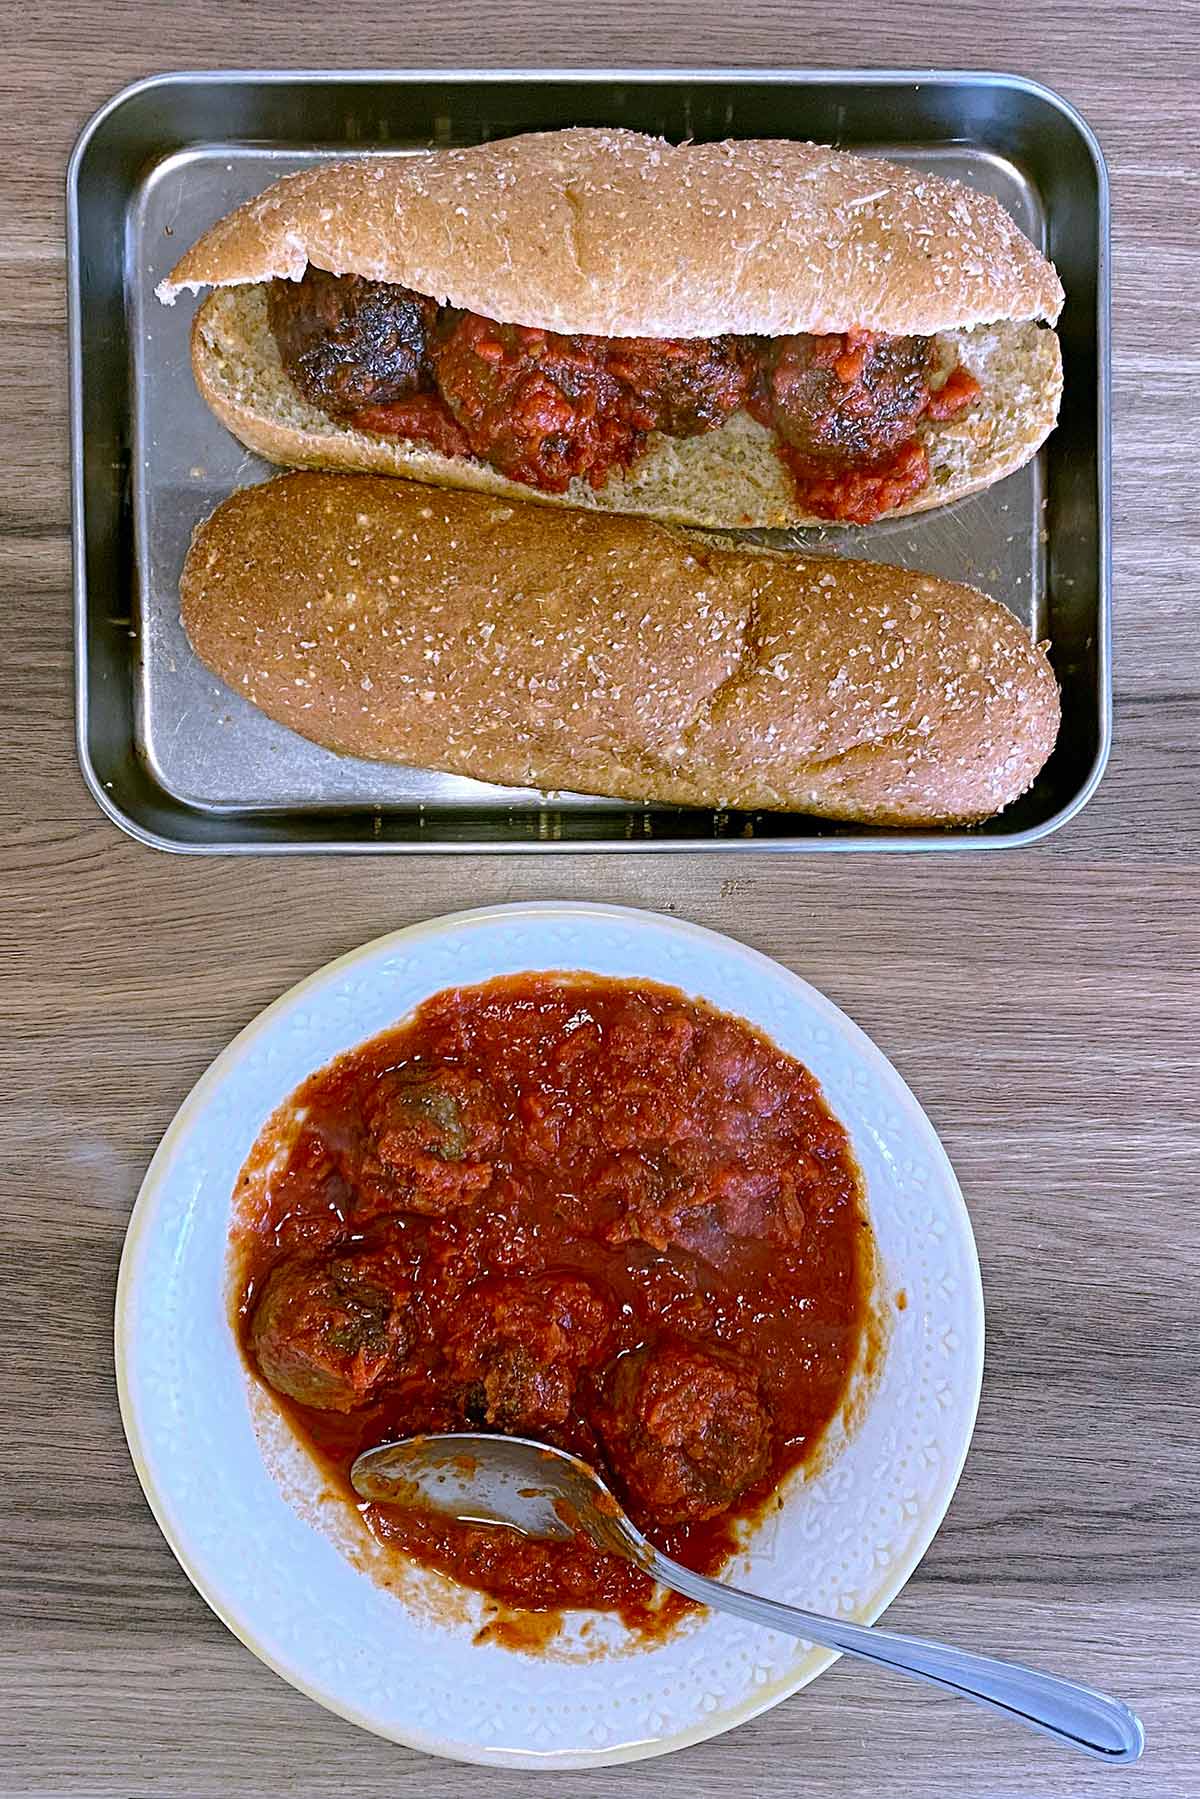 Two sub rolls filled with meatball marinara next to a bowl of more meatballs.